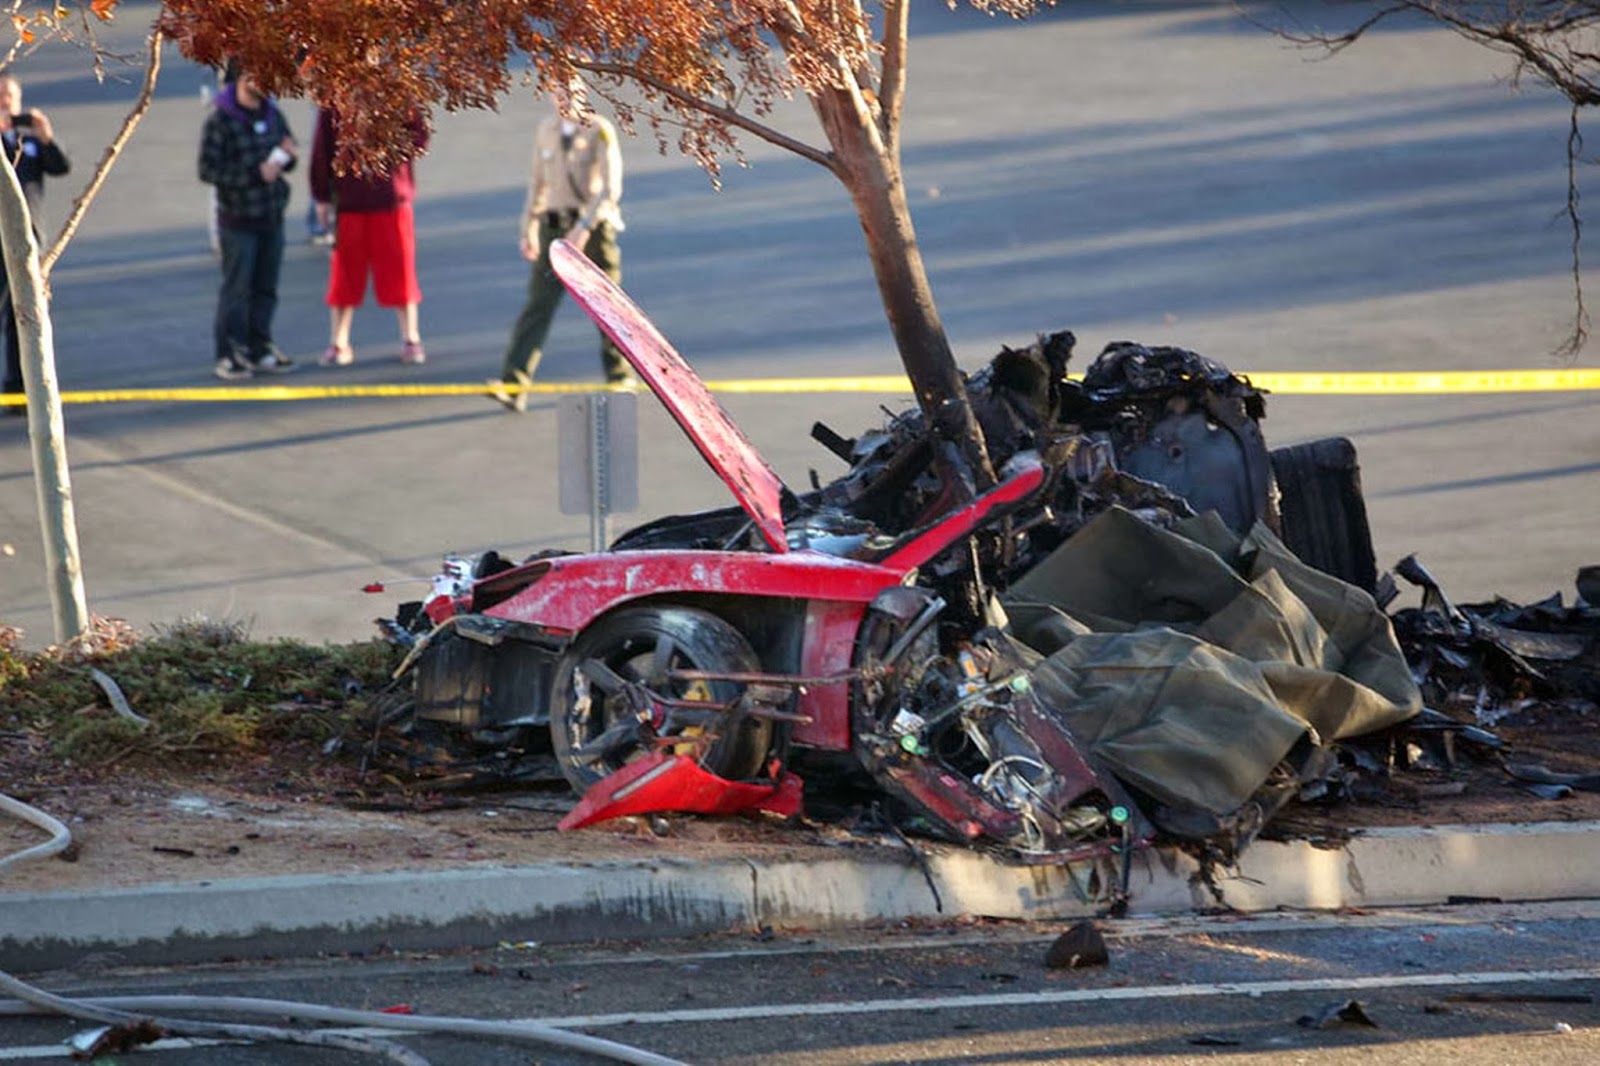 Celebrity News Paul Walker Dead Fast And Furious Star 40 Killed In A Car Crash